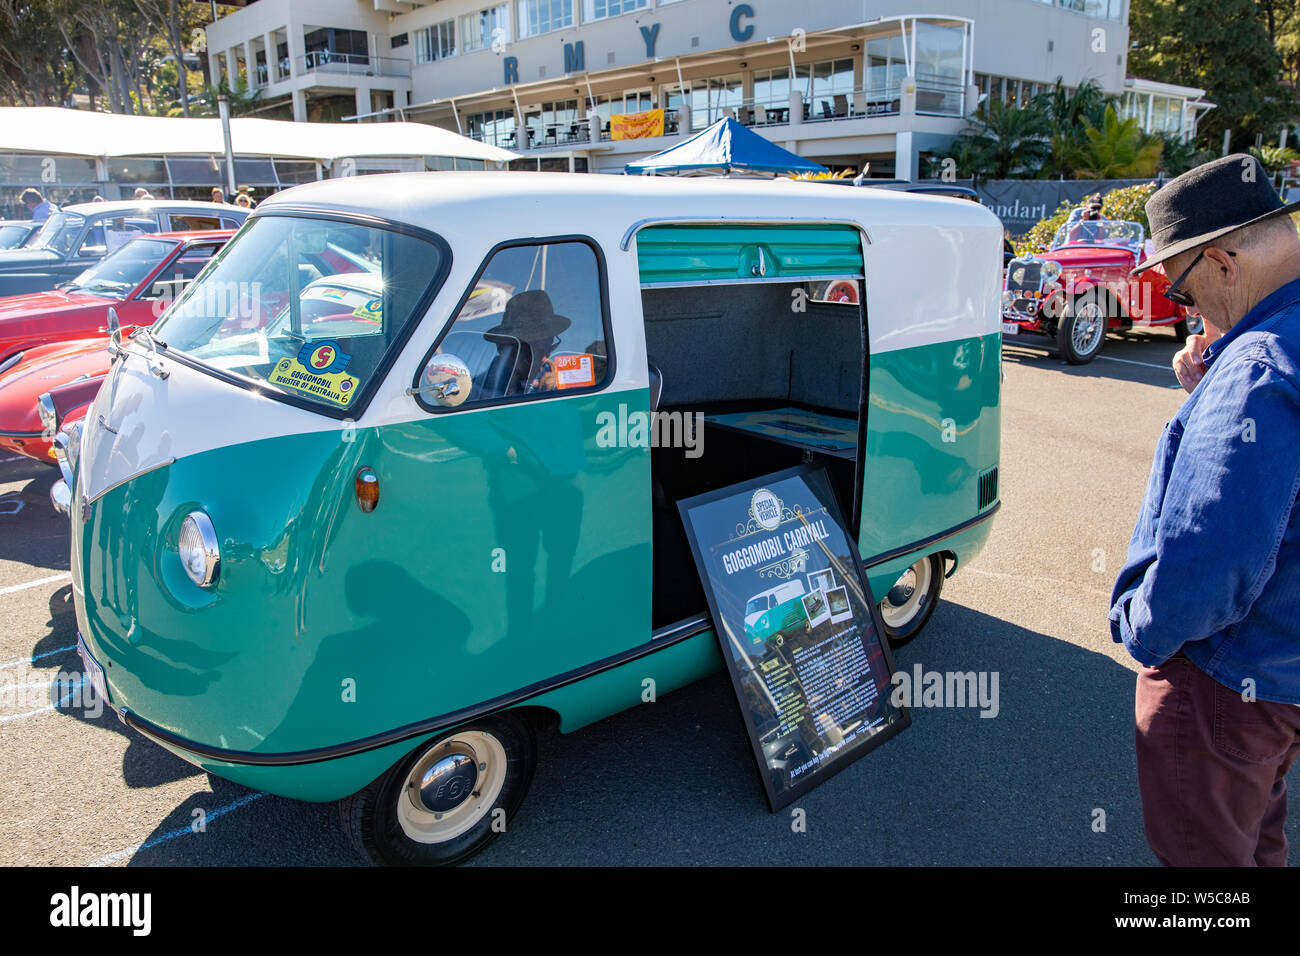 Goggomobil van, One of only 14 ever made, Goggomobil carryall van on display at the Royal motor yacht club in Newport,Sydney,ASustralia Stock Photo